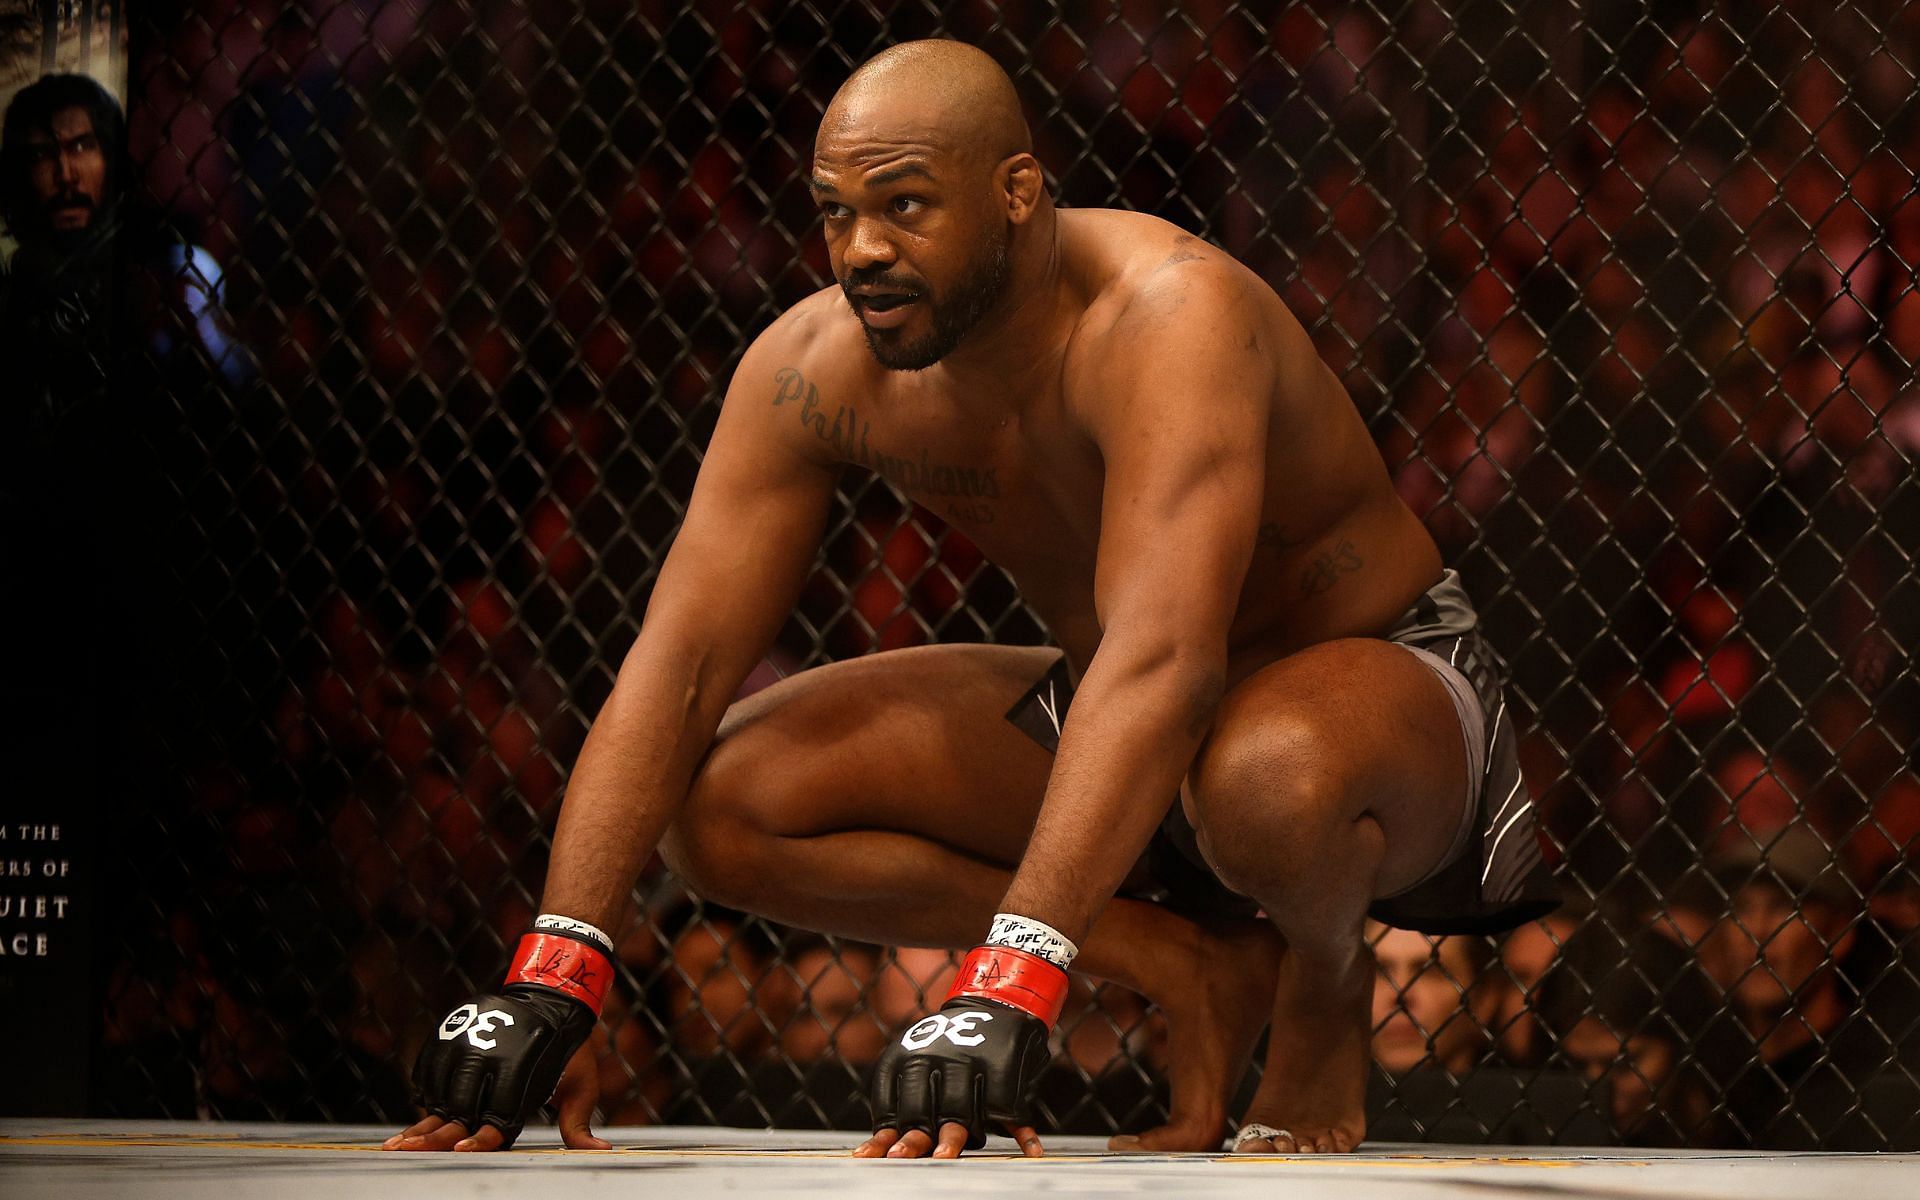 Jon Jones is heralded among the greatest MMA fighters ever [Image courtesy: Getty Images]